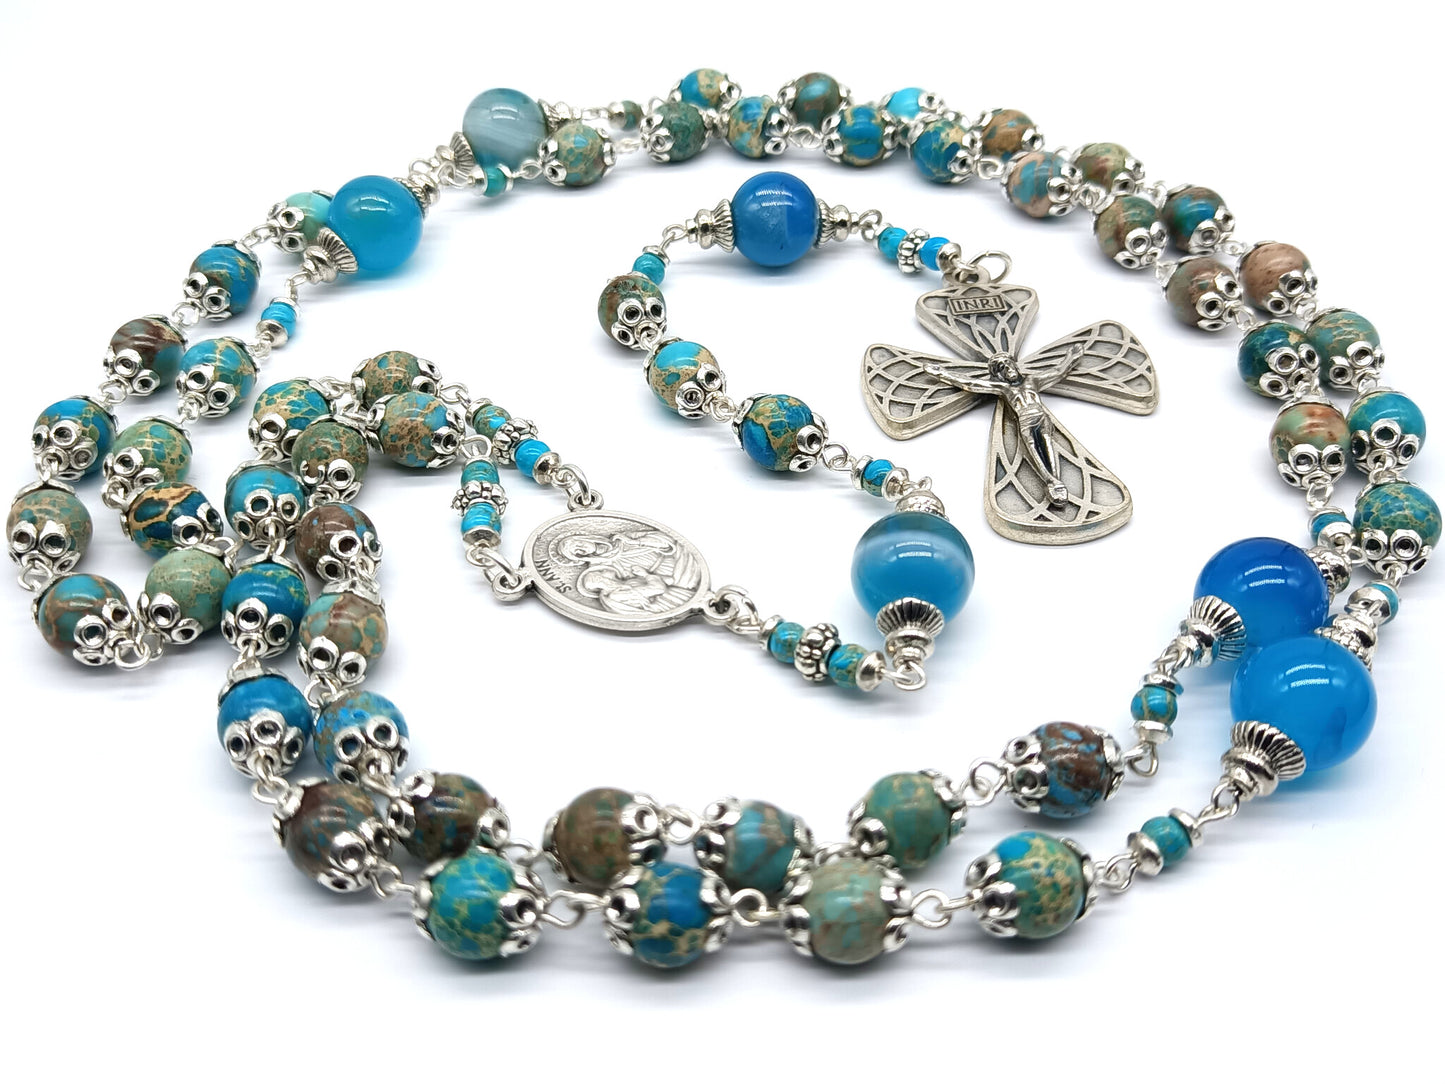 Saint Ann unique rosary beads with gemstone beads, silver crucifix, centre medal and blue glass pater beads.